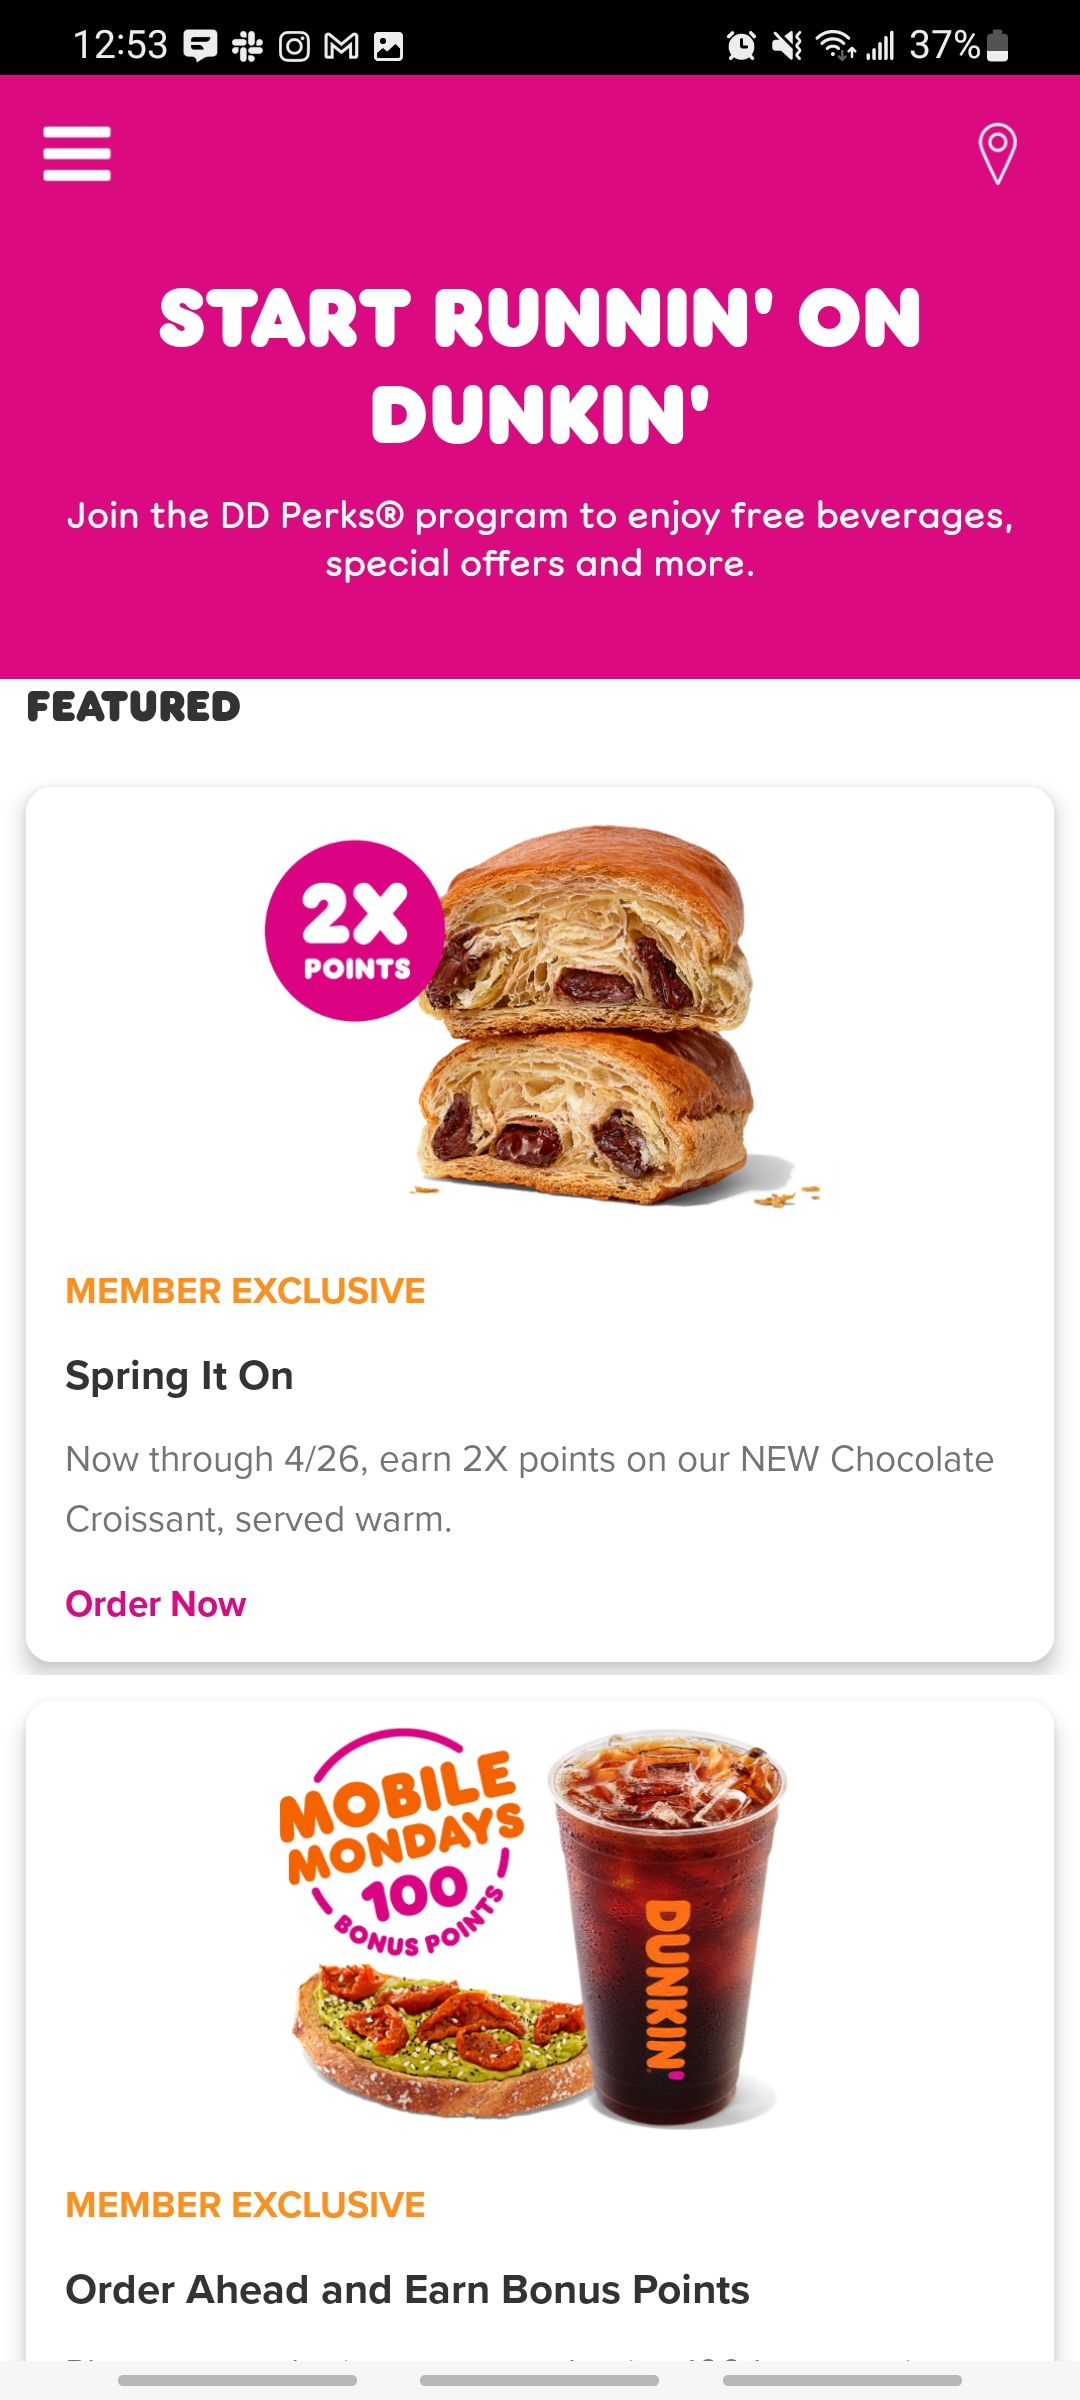 dunkin donuts app home screen showing featured bonus point offers